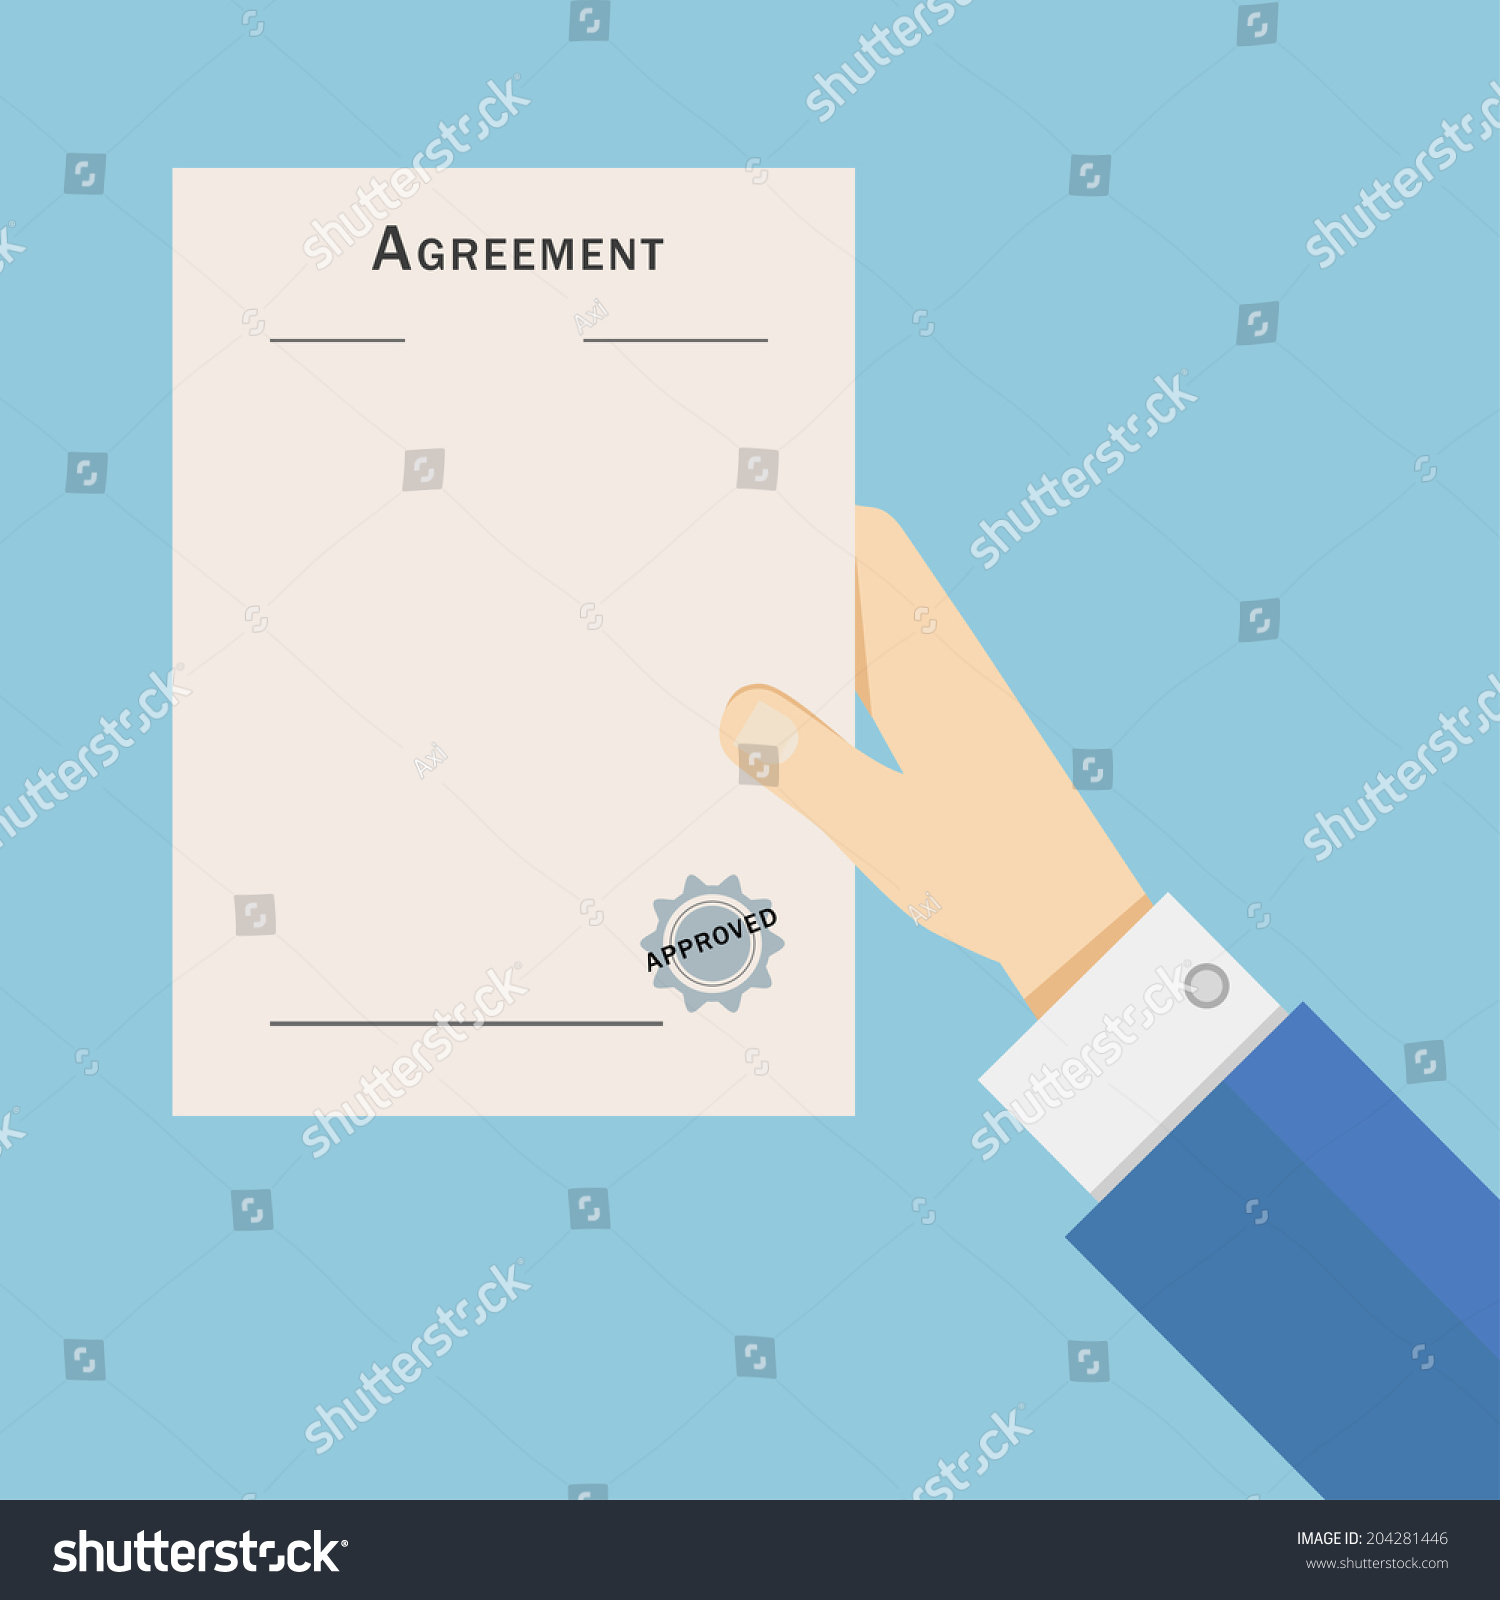 Vector Illustration Hand Holding Agreement Contract Stock Vector ...